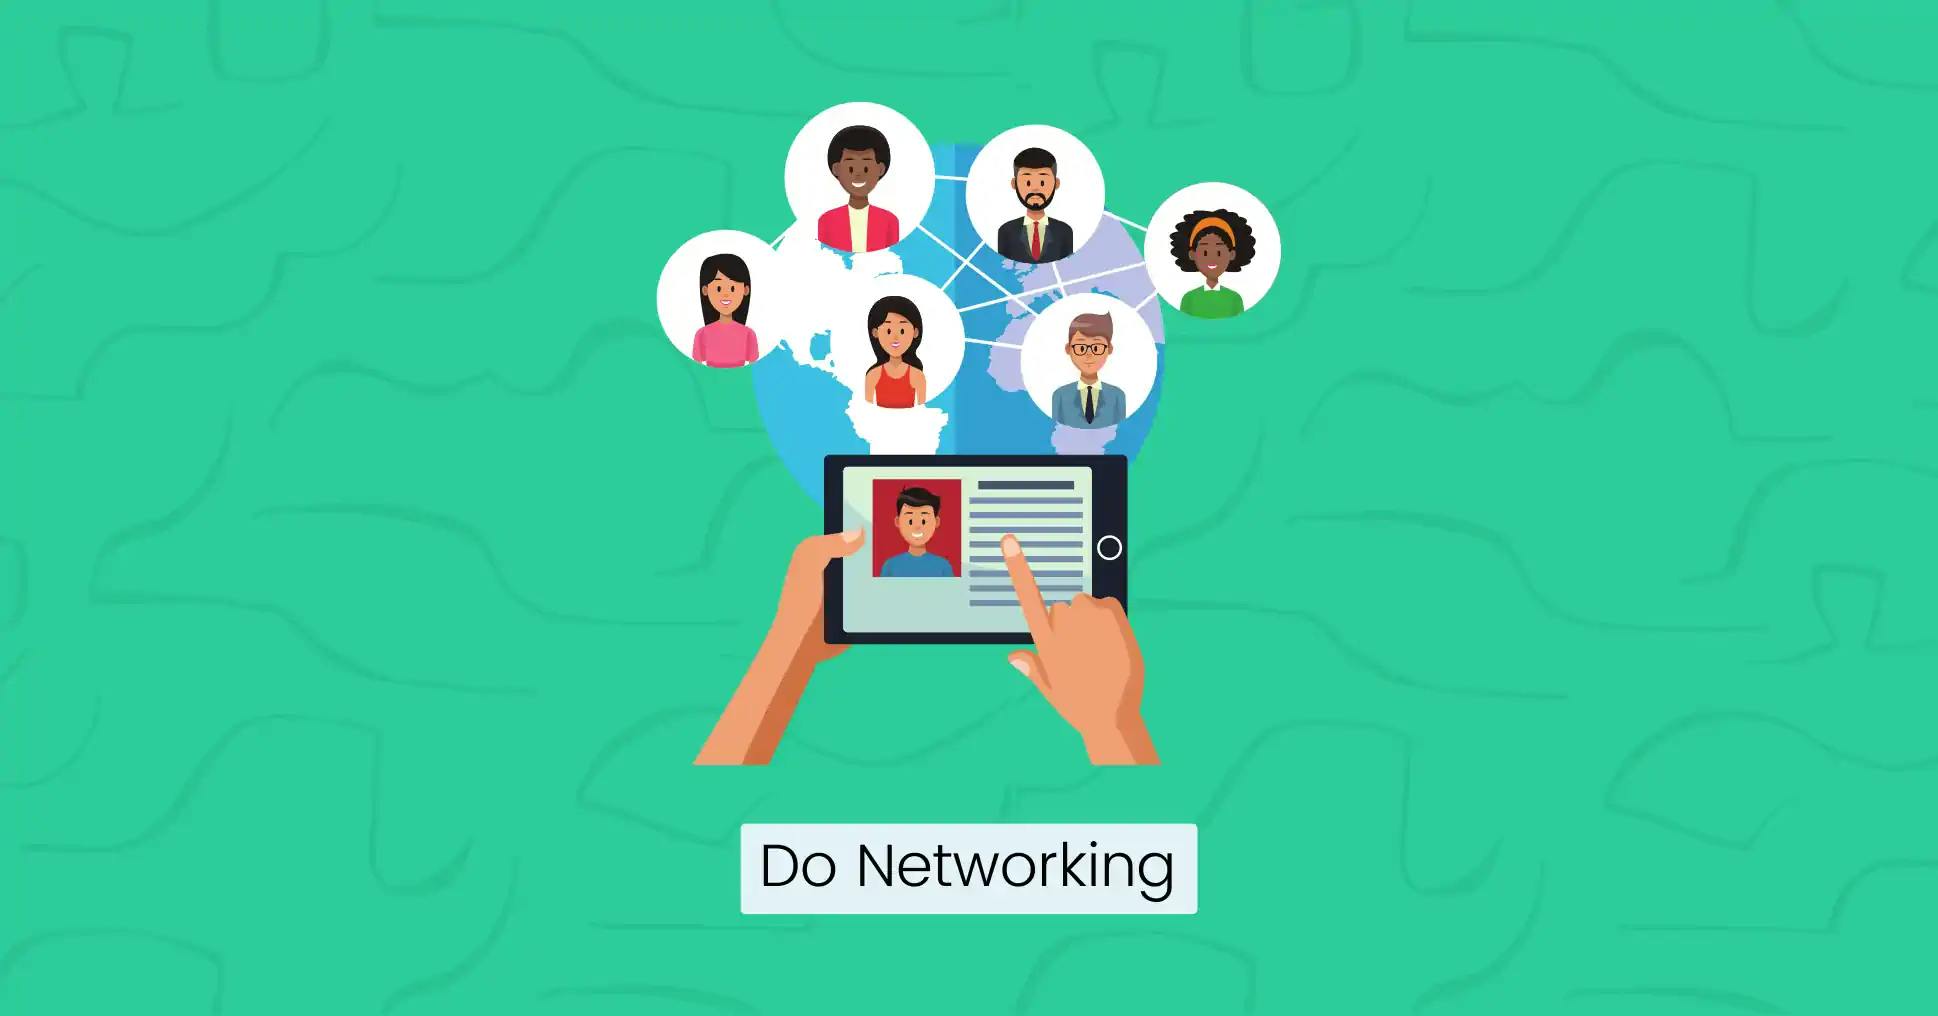 Do networking and connect with people